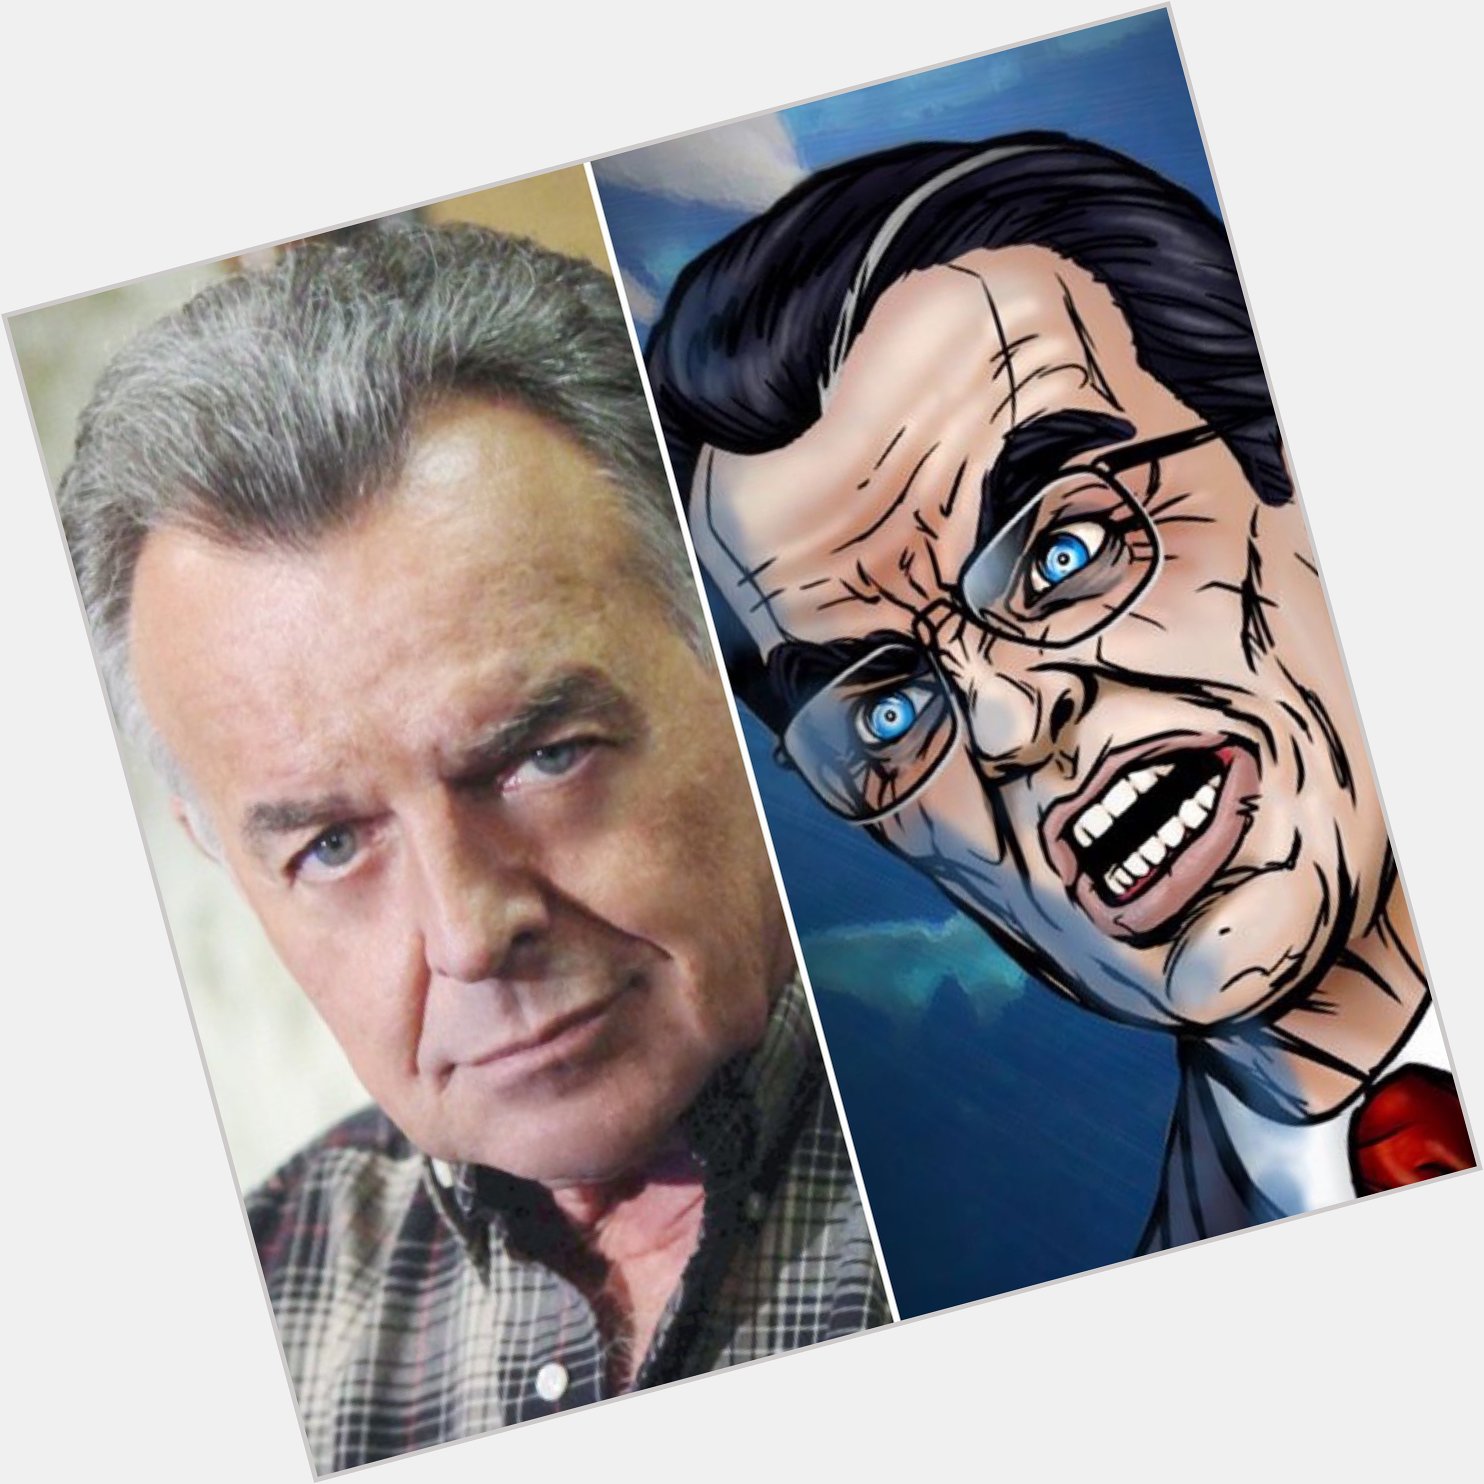 Happy birthday to the man, the myth, the legend our very own Ray Wise! 